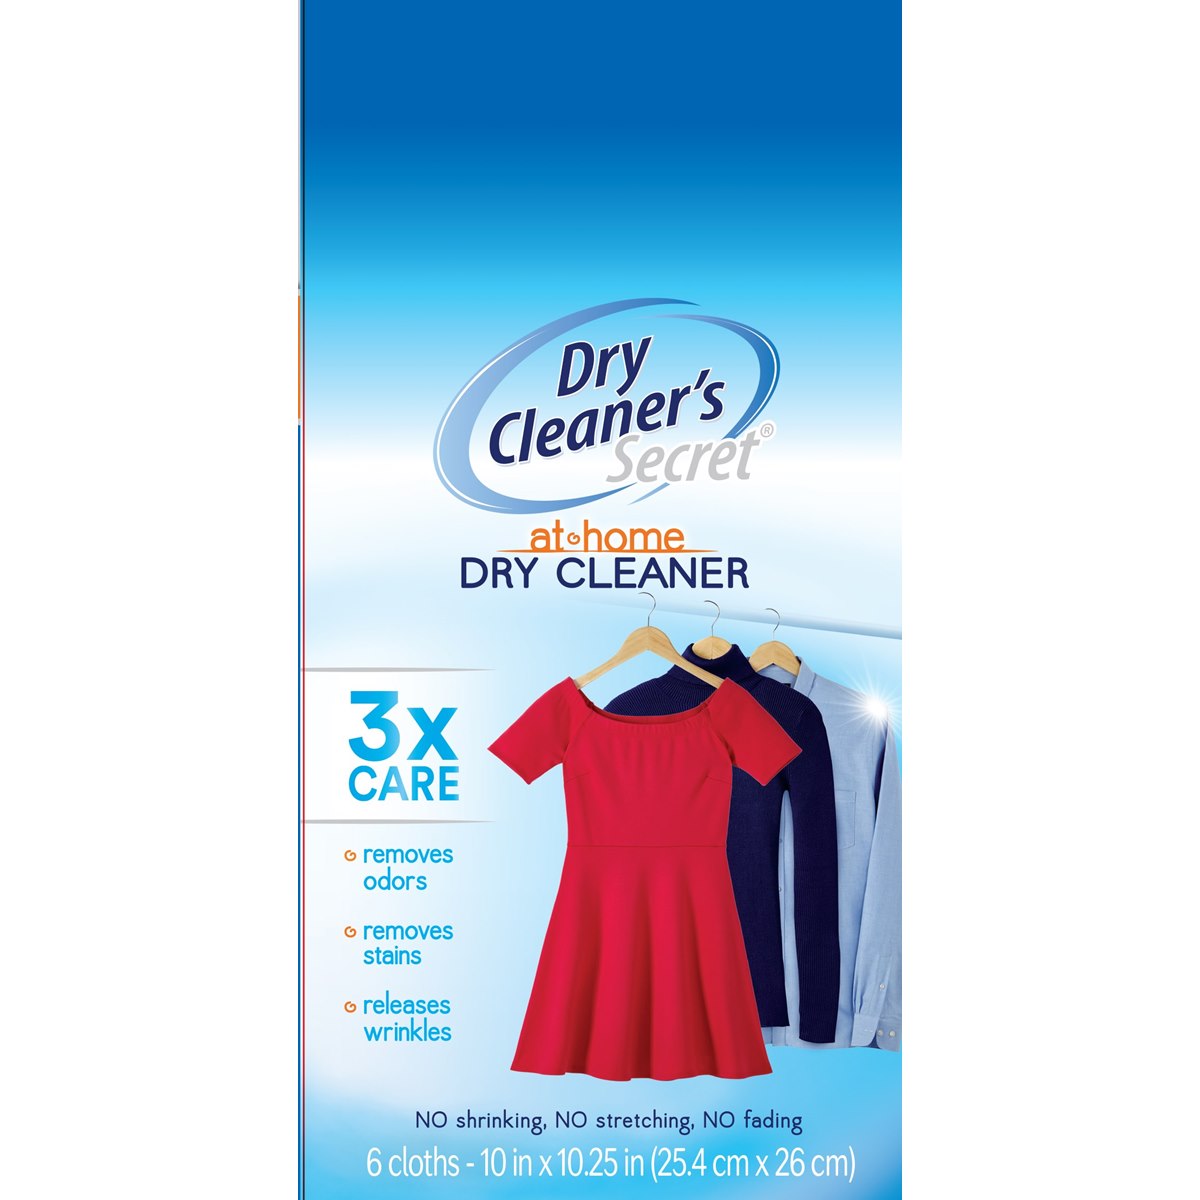 Where to buy Dry Cleaners Secret online